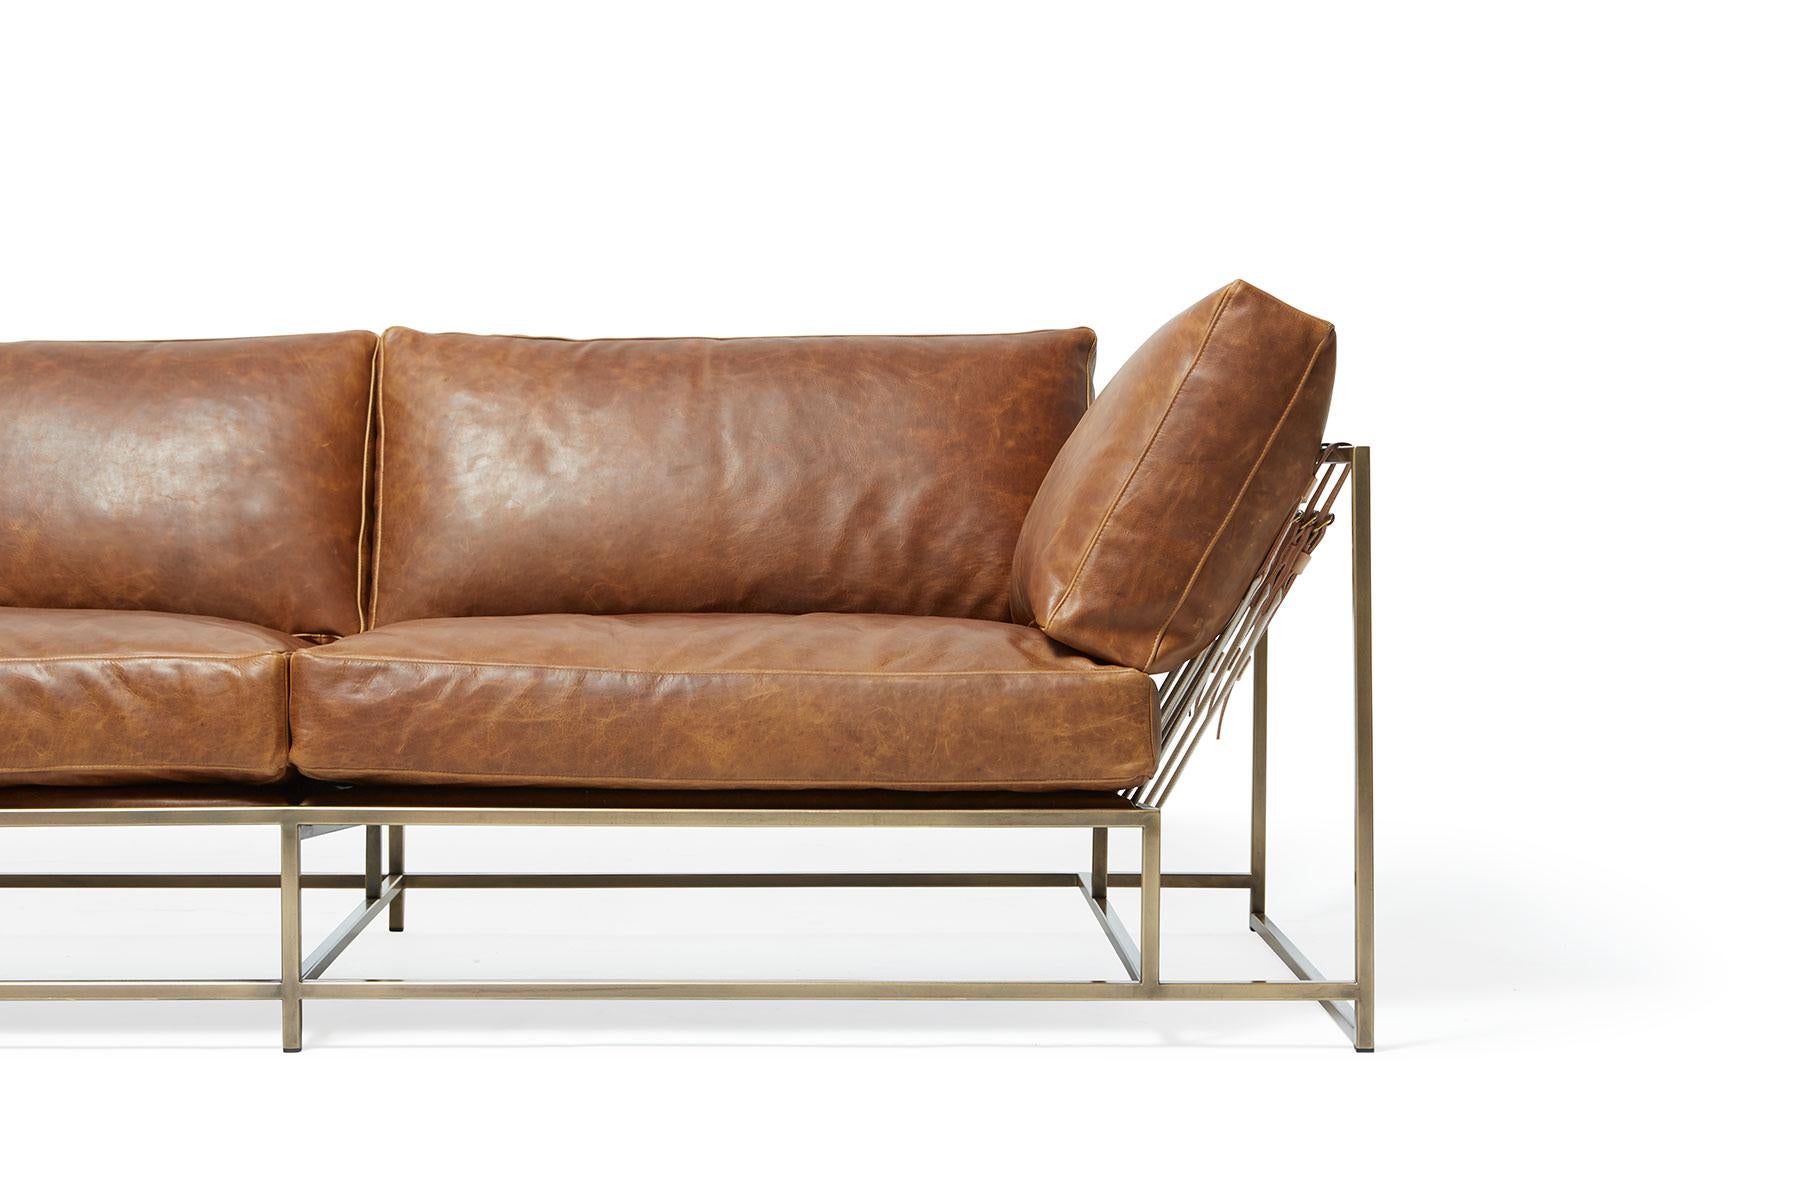 American Tan Leather & Antique Brass Two Seat Sofa For Sale